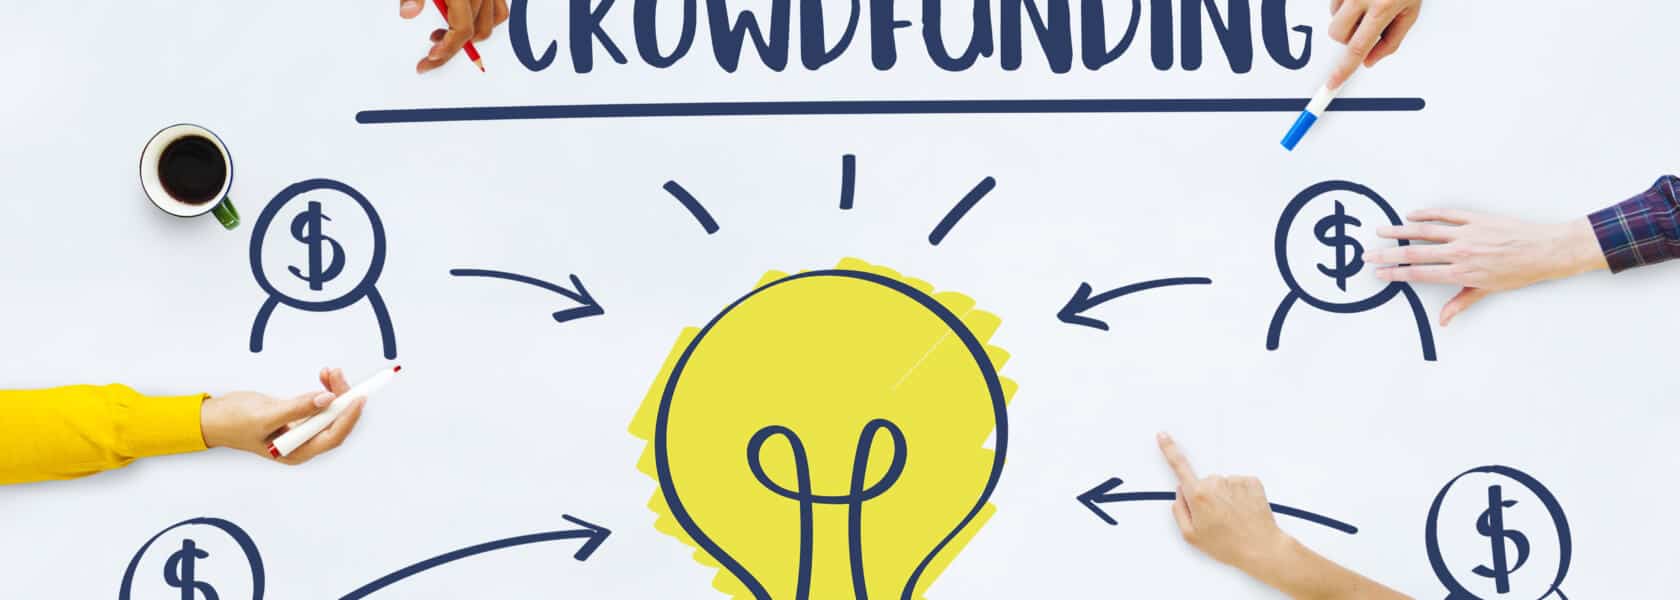 All You Need to Know About Crowdfunding